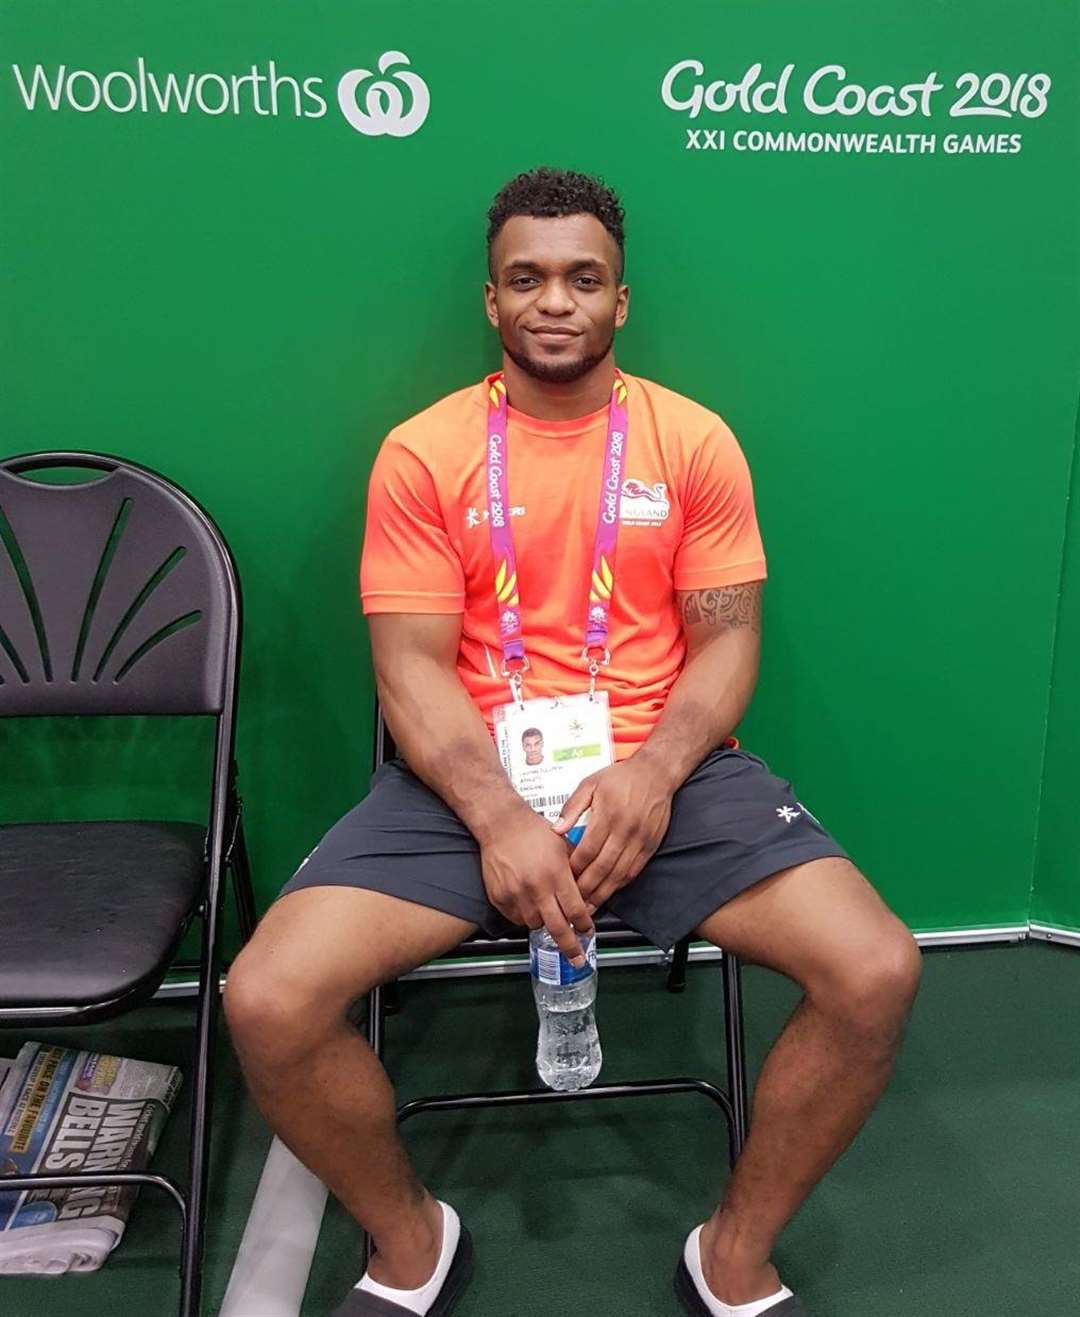 Courtney Tulloch in relaxed mood before the Commonwealth Games